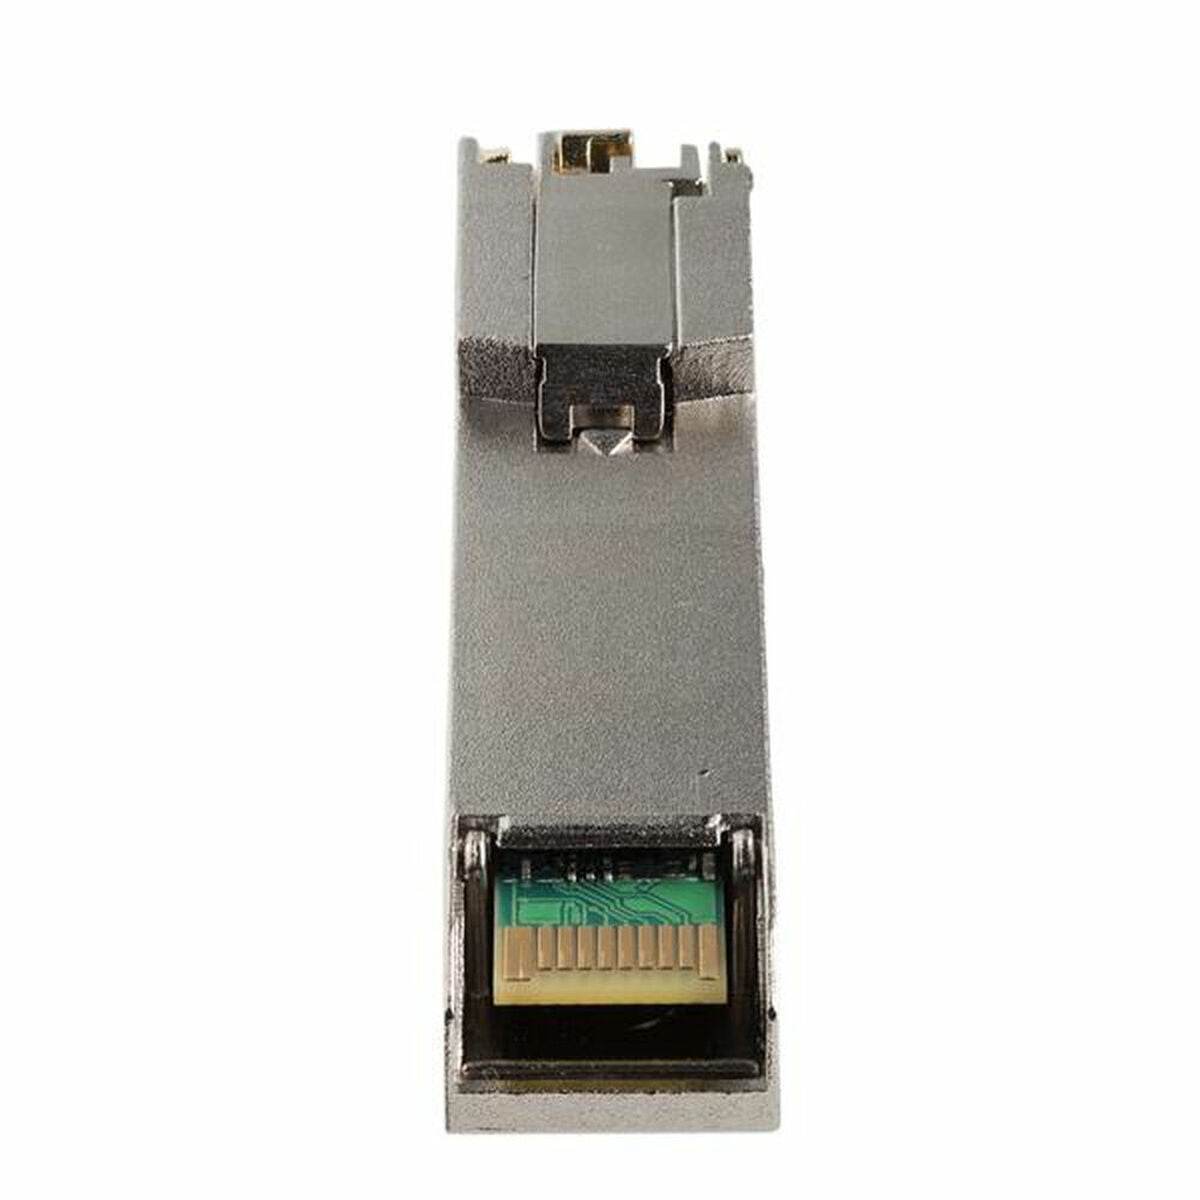 MultiMode SFP+ Fibre Module Startech 813874B21ST, Startech, Computing, Network devices, multimode-sfp-fibre-module-startech-813874b21st, Brand_Startech, category-reference-2609, category-reference-2803, category-reference-2821, category-reference-t-19685, category-reference-t-19914, Condition_NEW, networks/wiring, Price_200 - 300, Teleworking, RiotNook